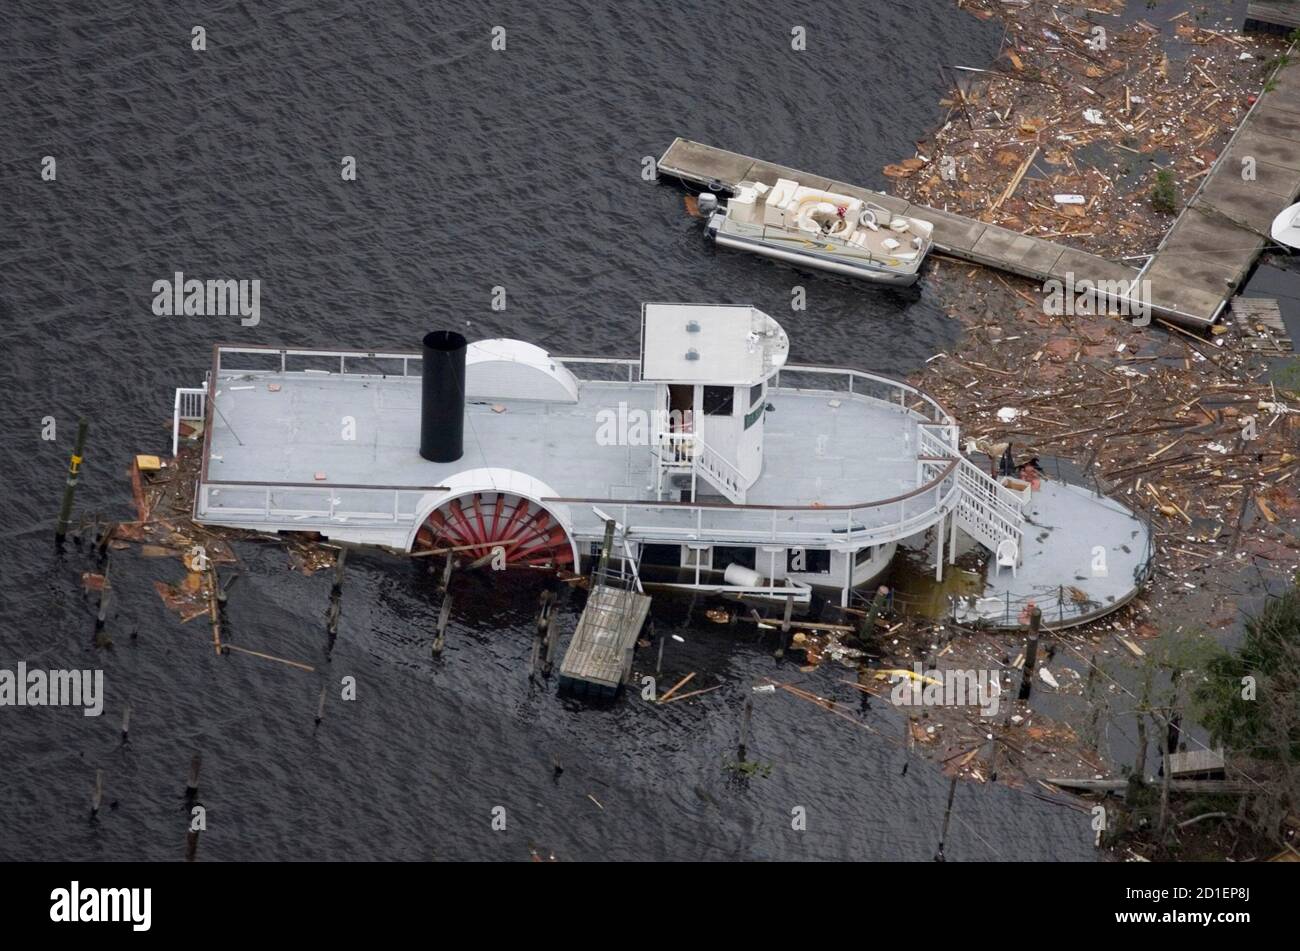 the-beresford-lady-a-local-tour-excursion-boat-sits-half-sunk-near-deland-florida-february-2-2007-after-a-tornado-swept-through-the-area-severe-thunderstorms-and-at-least-one-tornado-killed-19-people-on-friday-when-they-ripped-through-florida-in-the-dead-of-night-tearing-homes-to-shreds-toppling-heavy-trucks-and-leaving-a-trail-of-rubble-reuterspierre-ducharme-united-states-2D1EP8J.jpg